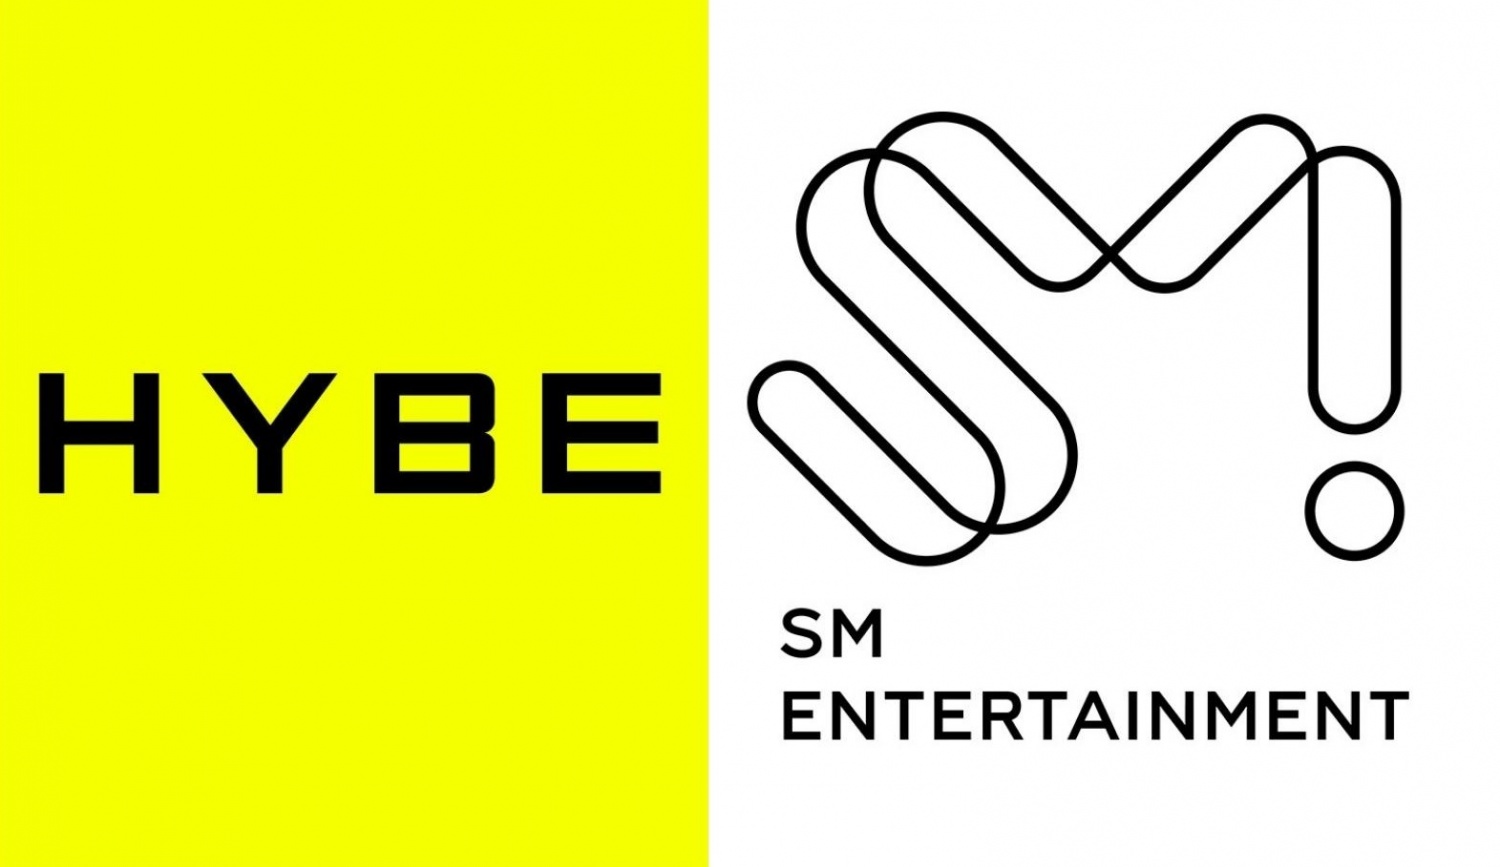 Will HYBE Replace SM's Current Authorities? Here's What We Know So Far